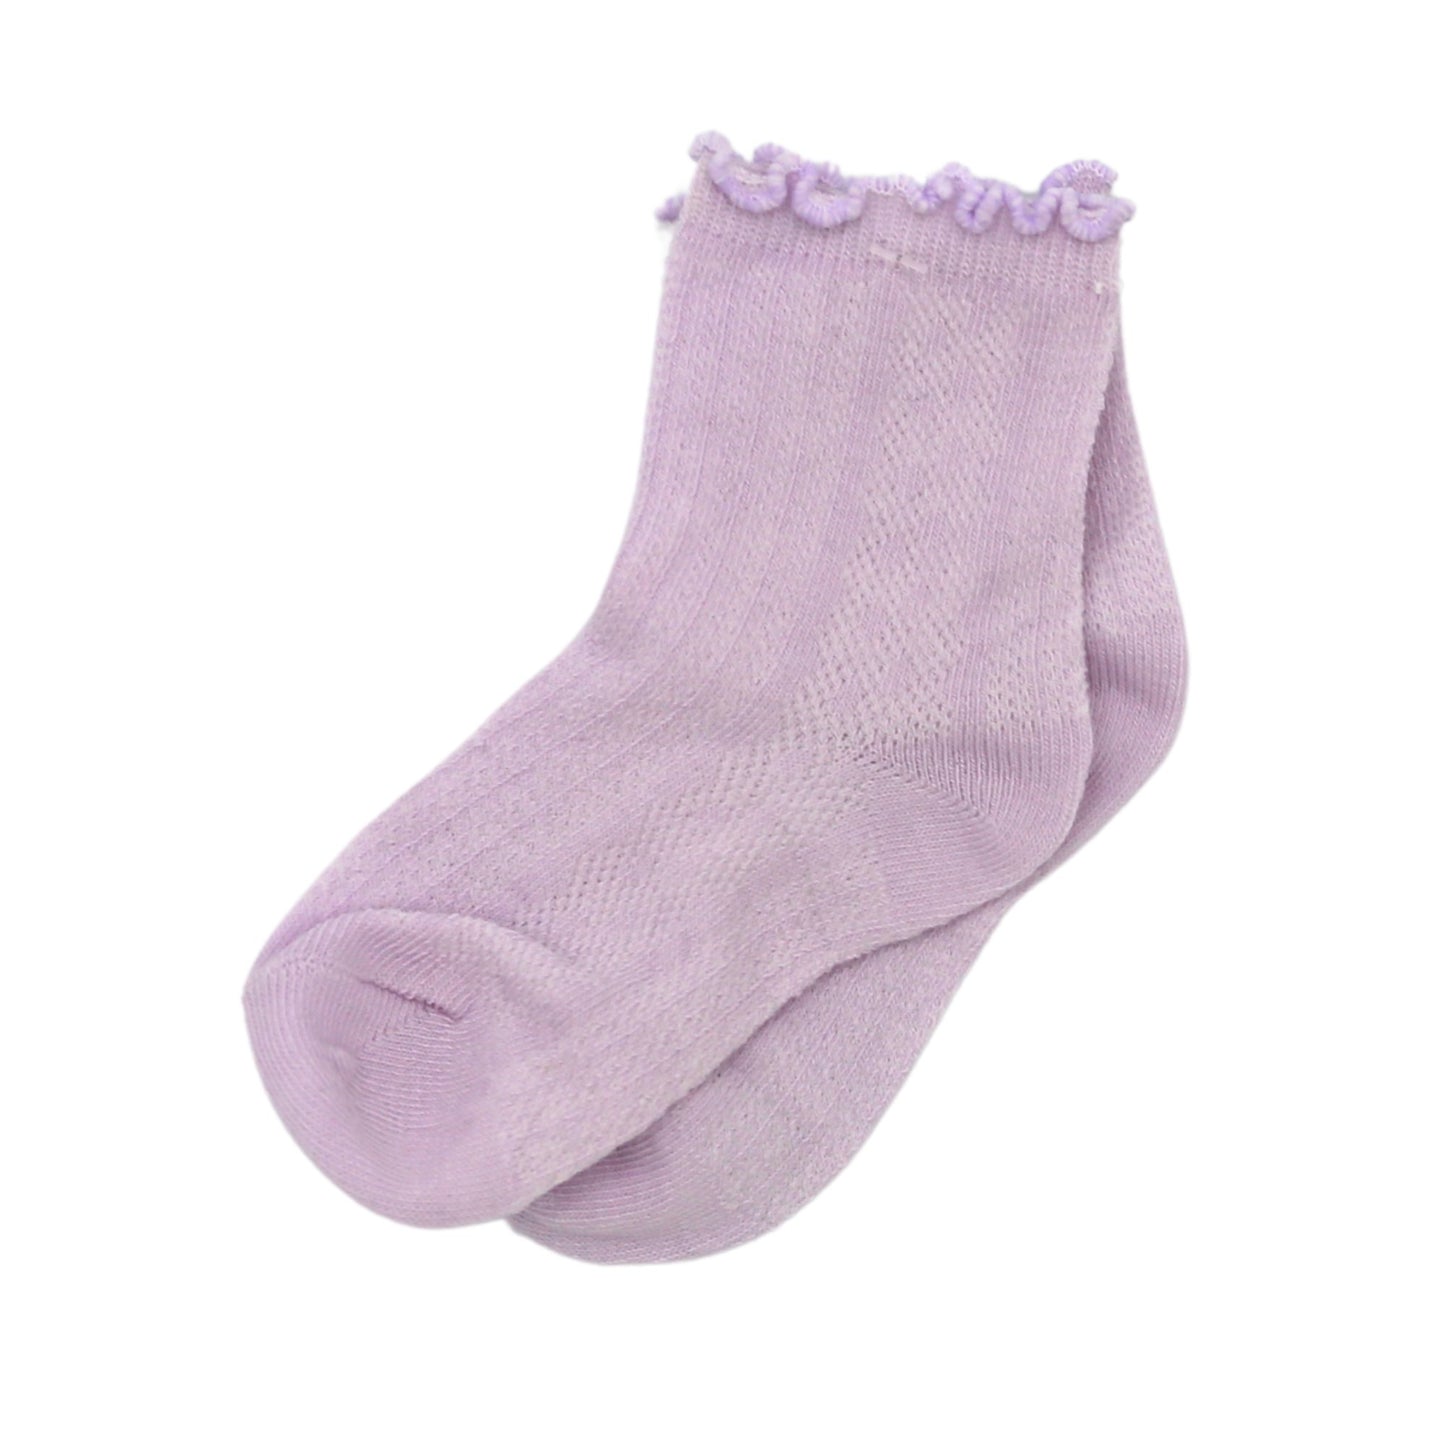 Baby Cubby Patterend Scallop Rib Socks - Light Lavender